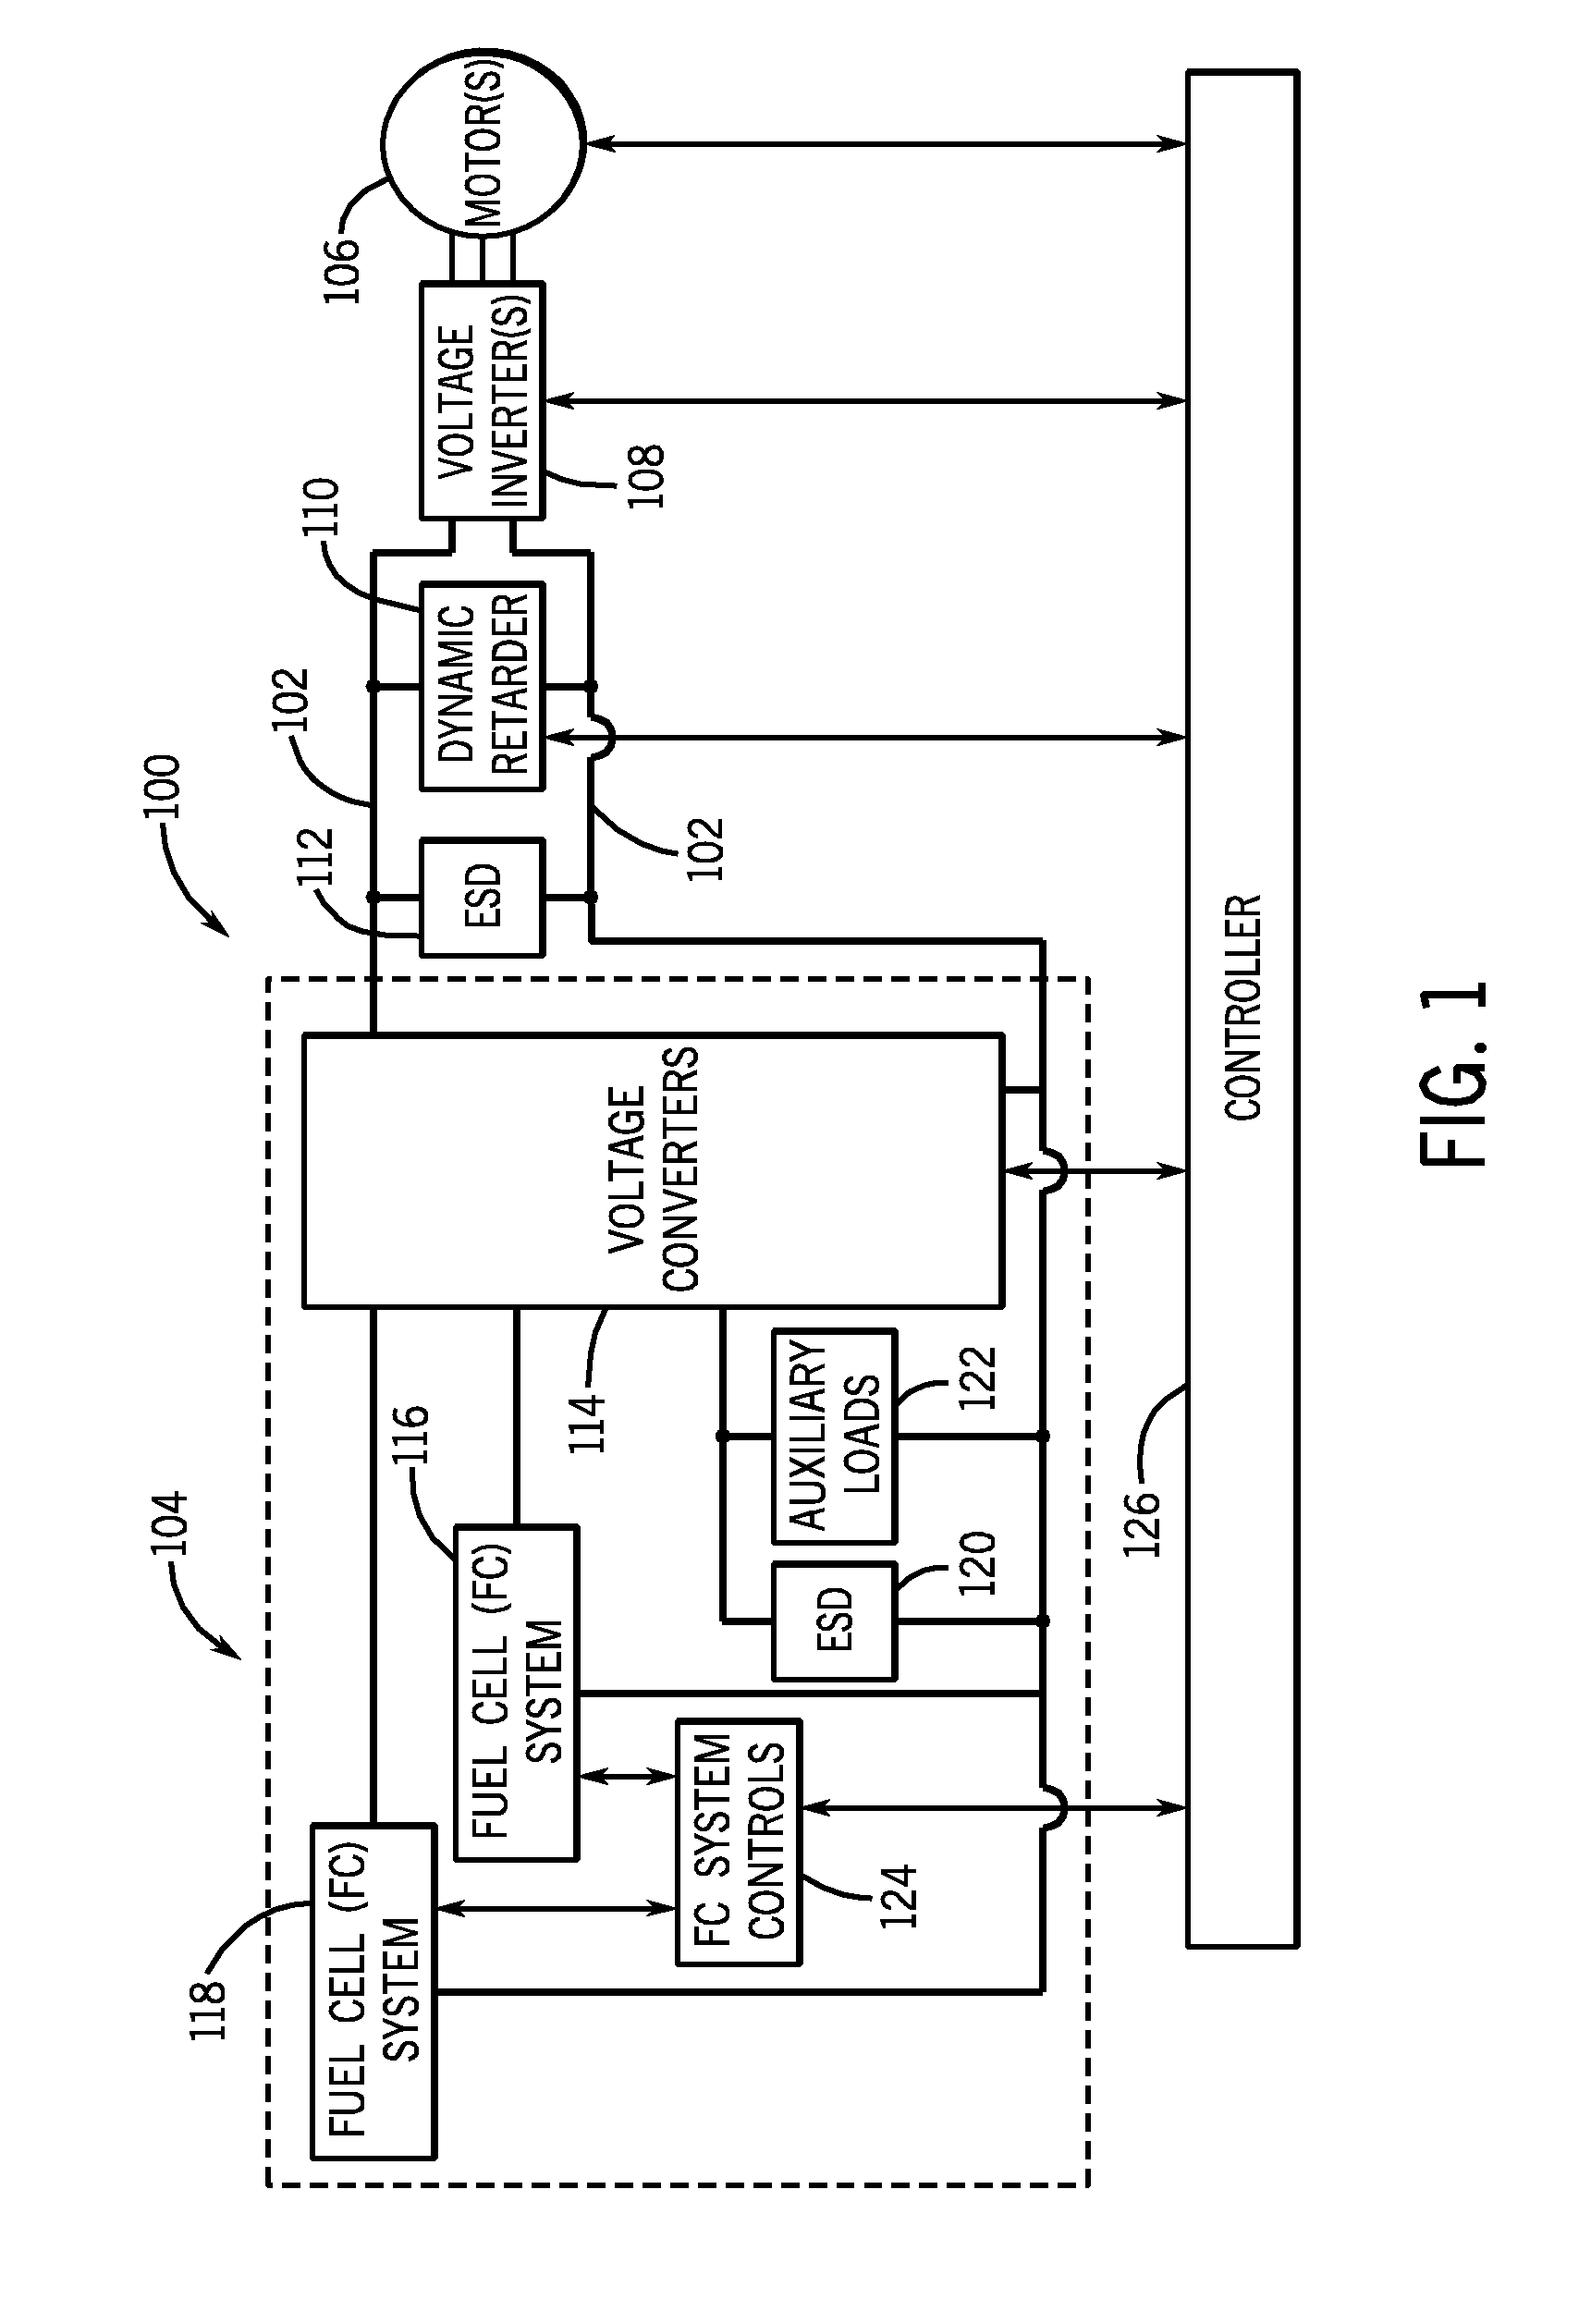 Apparatus for high efficiency operation of fuel cell systems and method of manufacturing same